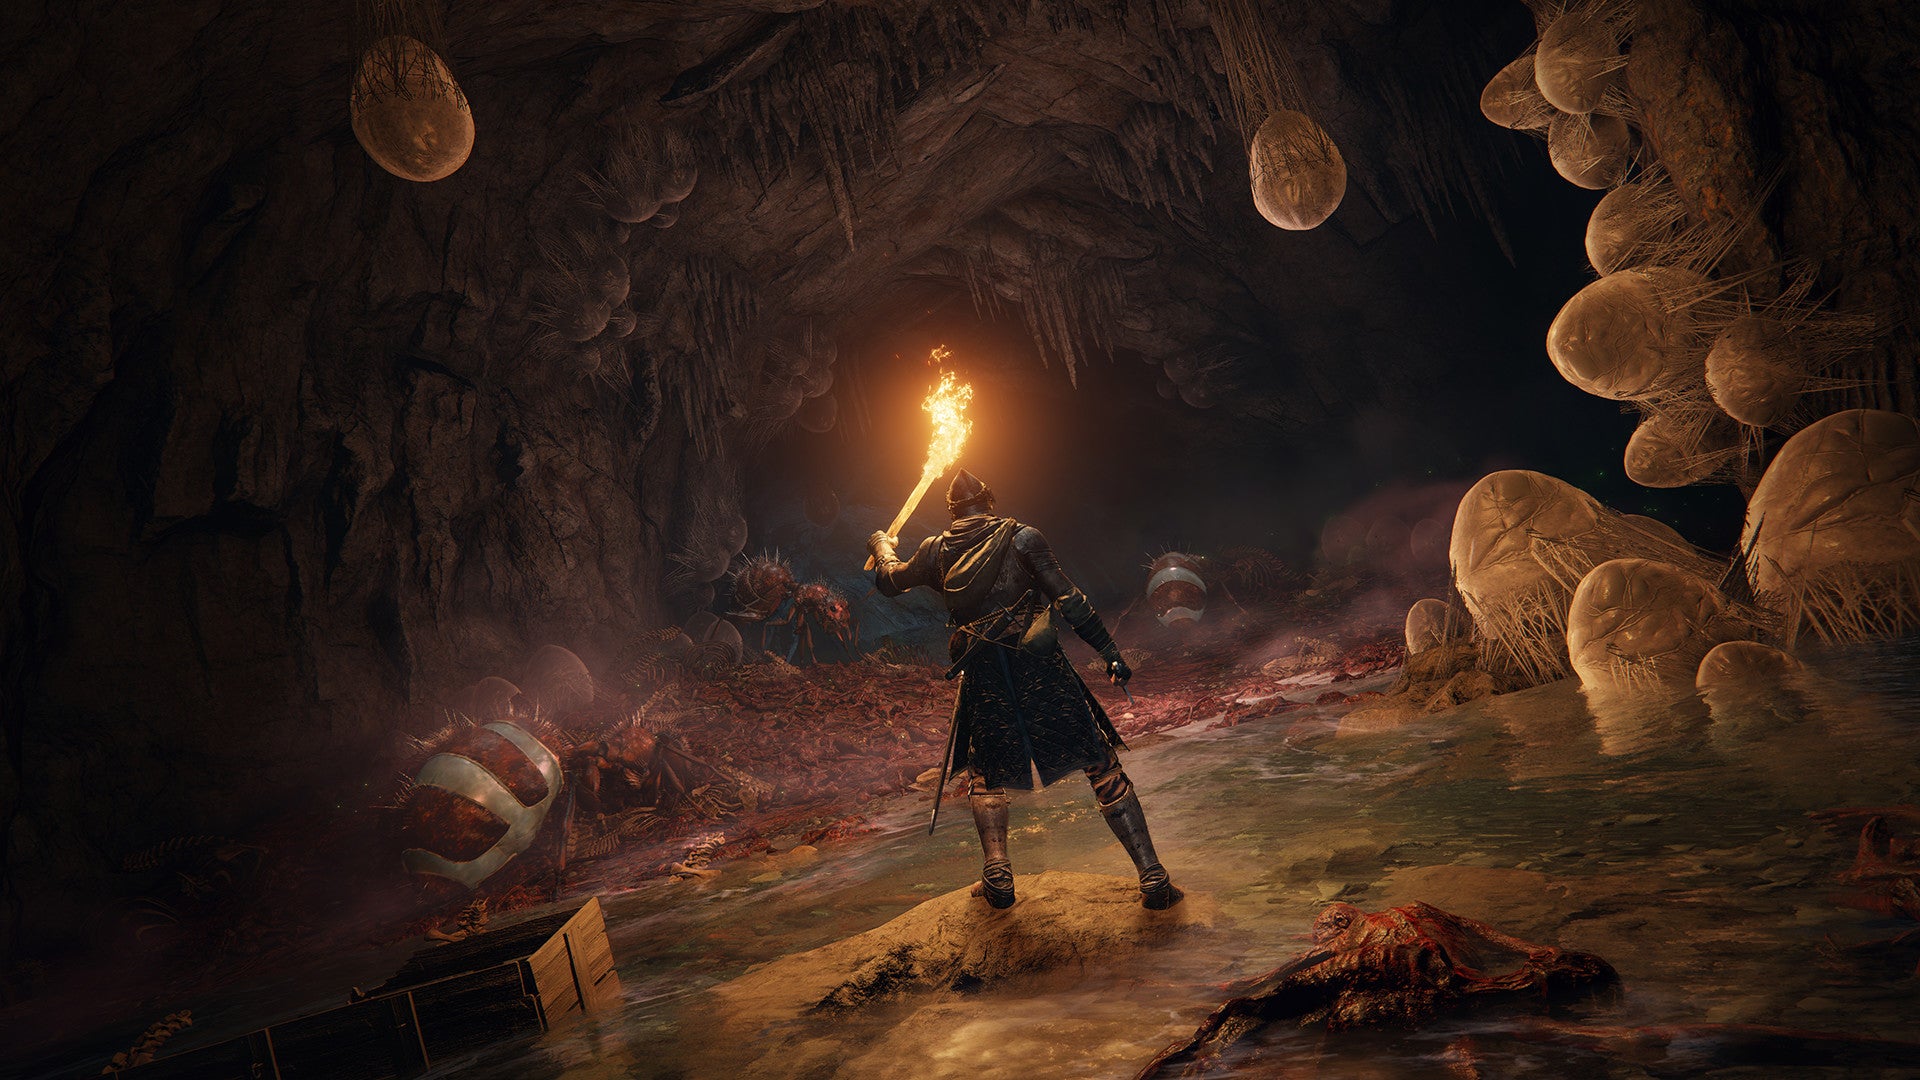 A player character holds a lit torch to illuminate a dark dungeon tunnel in Elden Ring